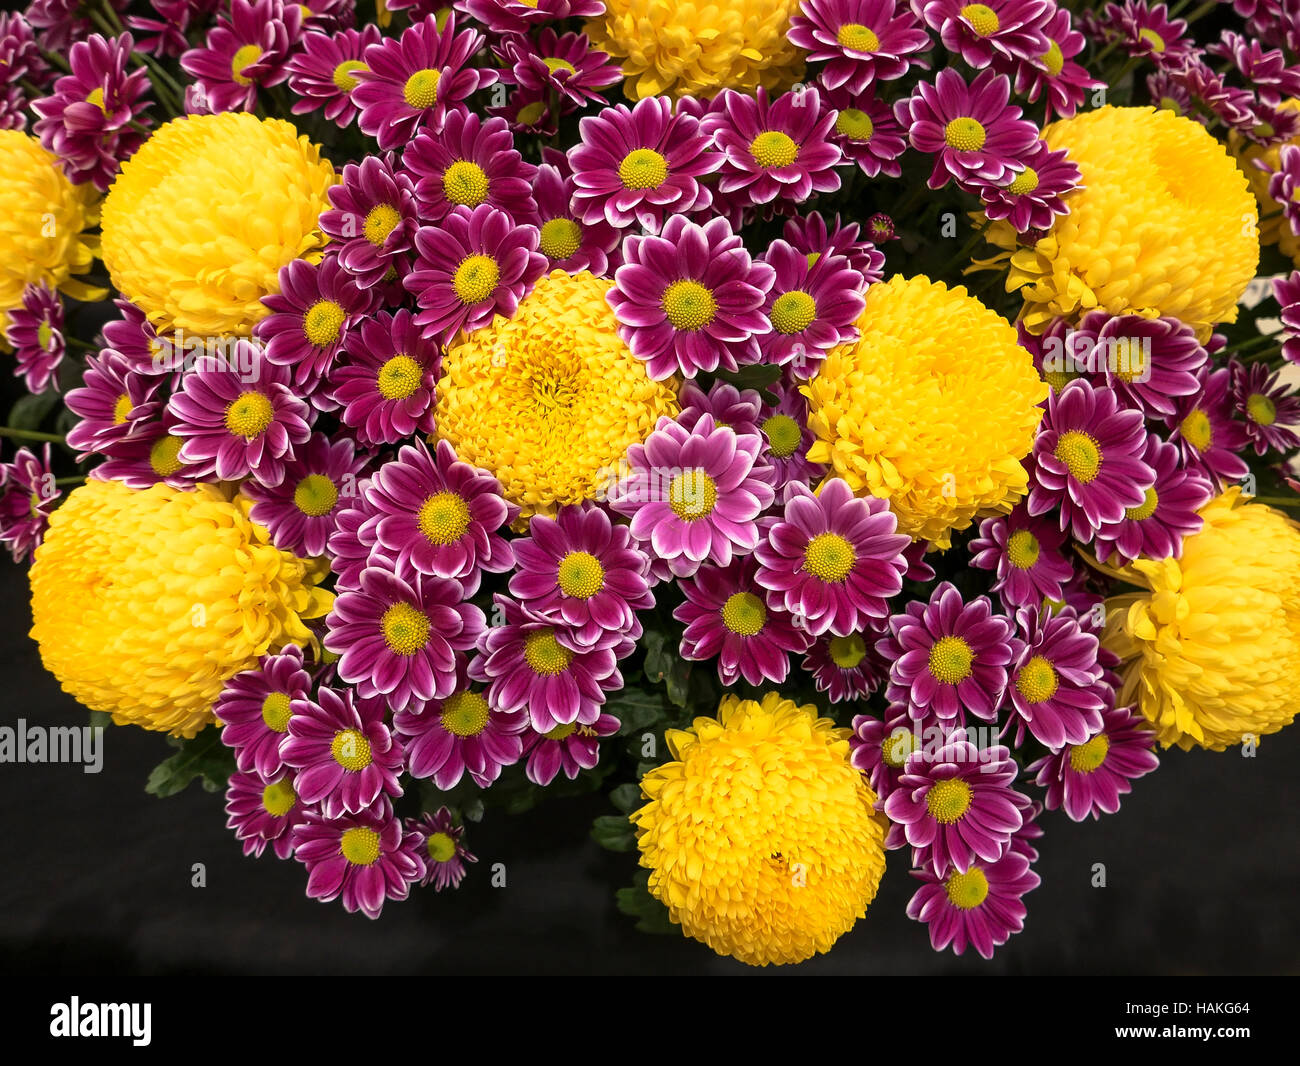 Display of cut flower chrystanthemums at a show Stock Photo